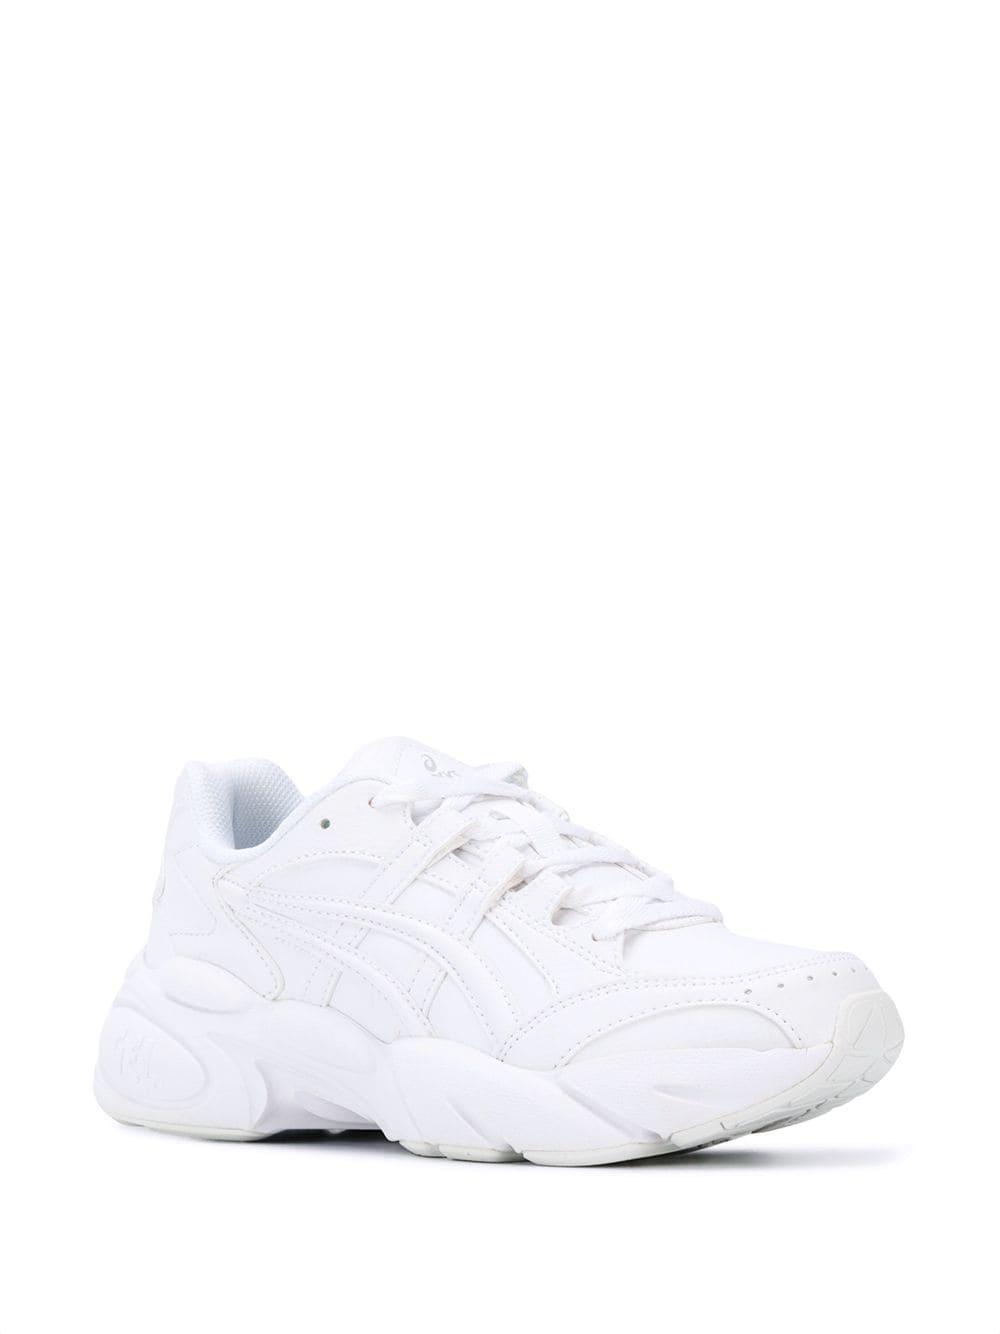 Asics Chunky Low Top Sneakers in White | Lyst